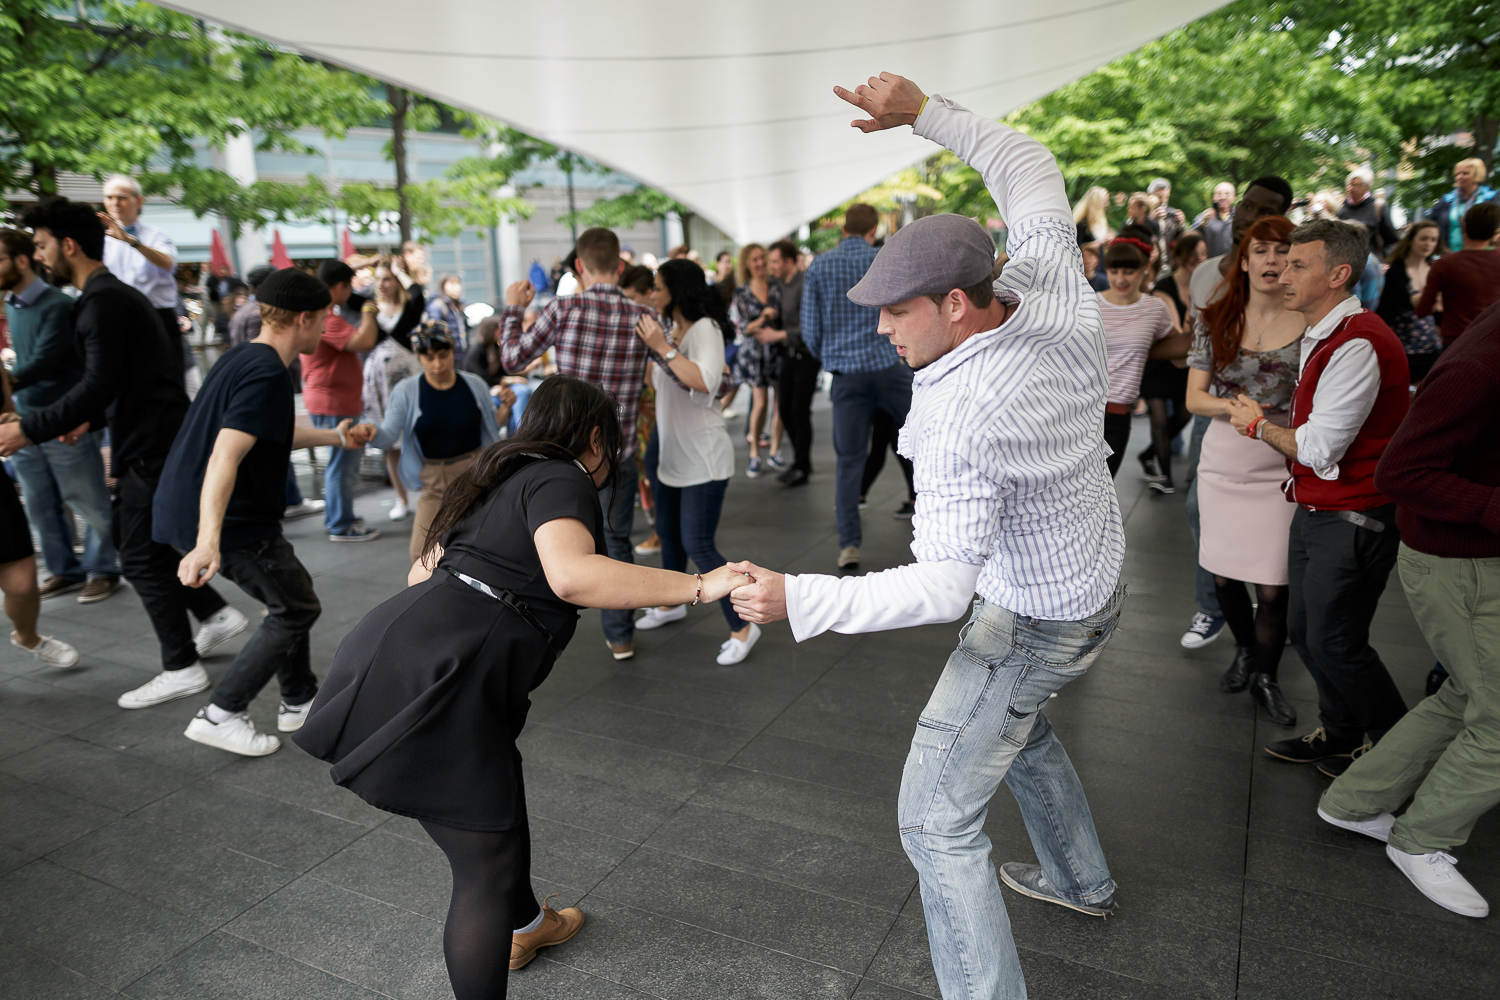  The London Swing Festival 2015. Photo Credit: For Dancers Only (http://d.pr/1fEEY) - http://www.ebobrie.com/london-swing-festival-2015/ 